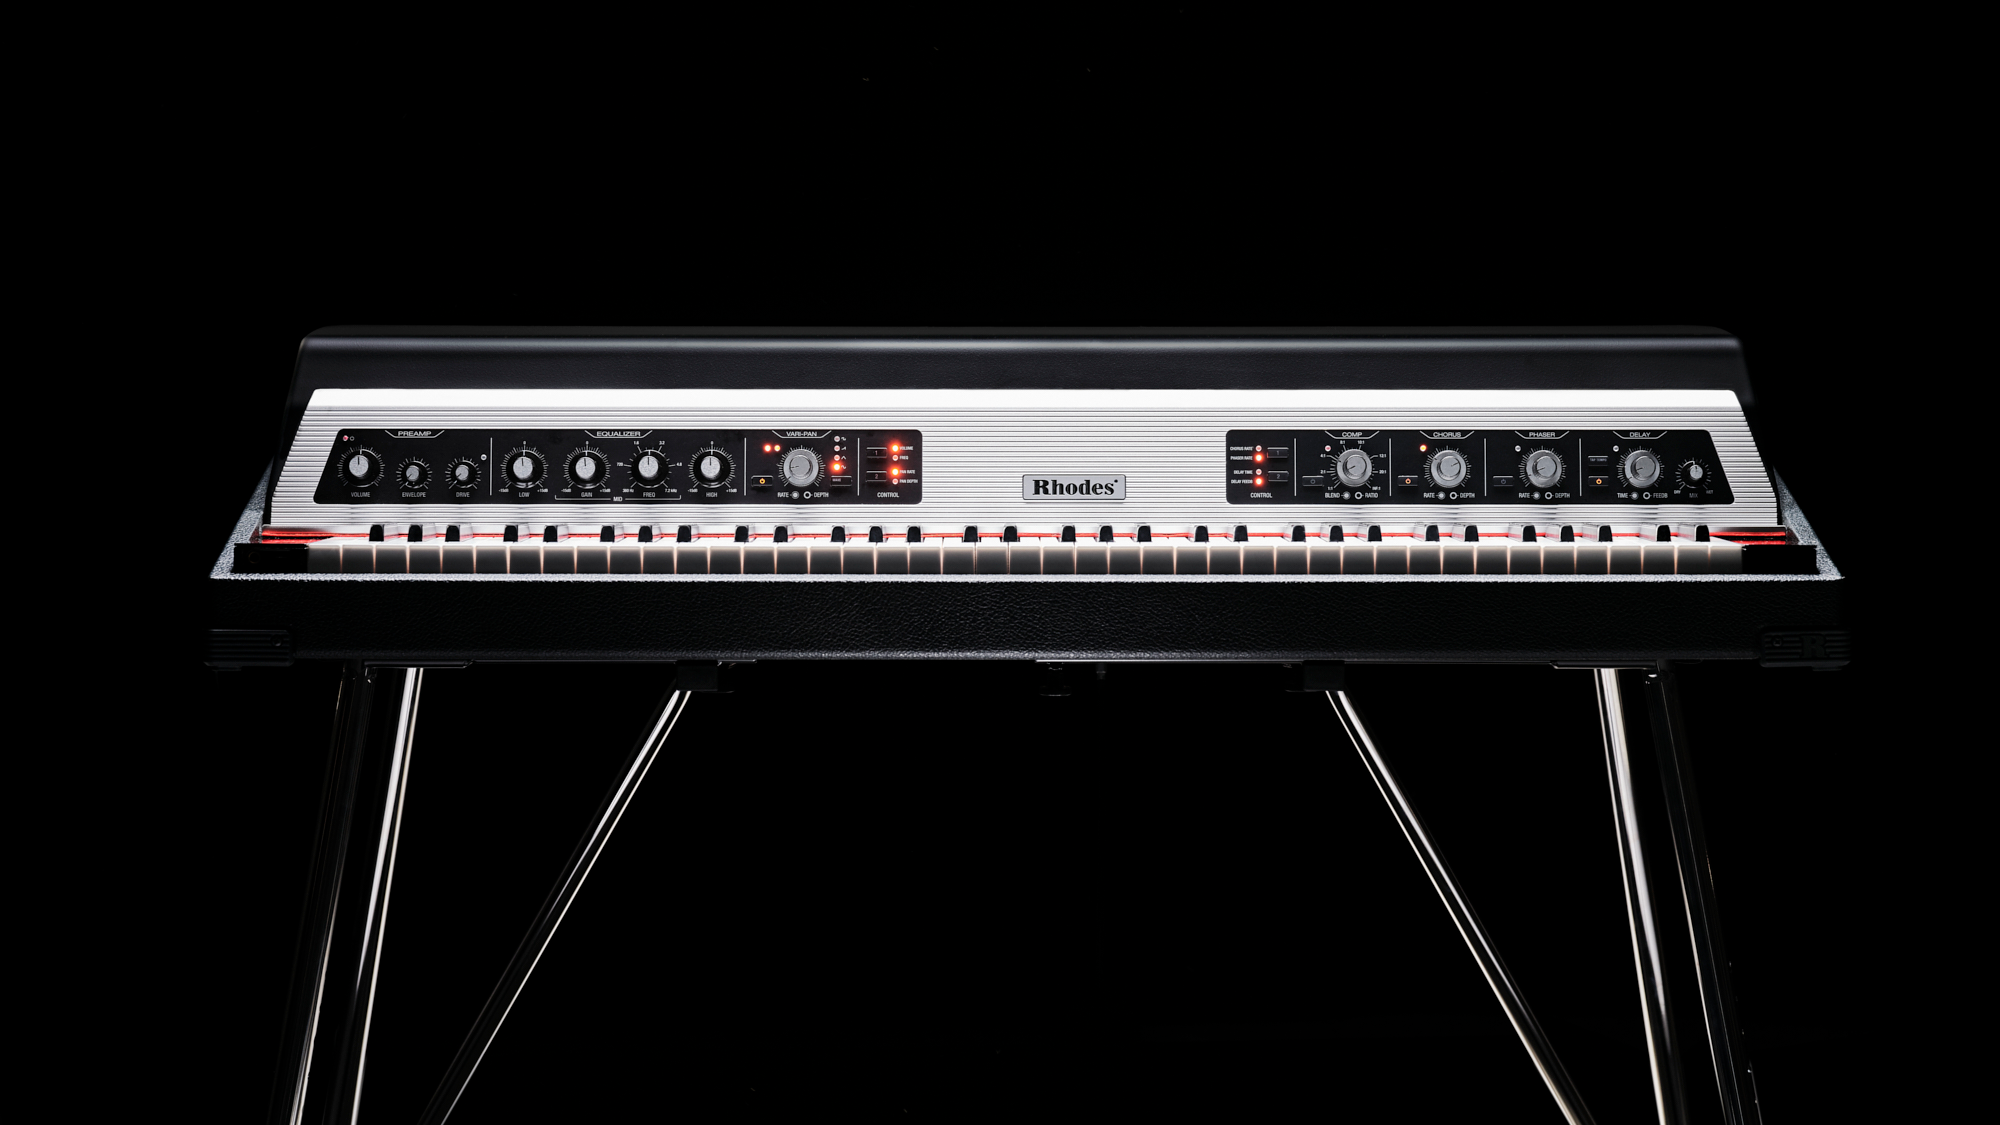 Rhodes MK8 images, video and tech specs revealed: here's what we